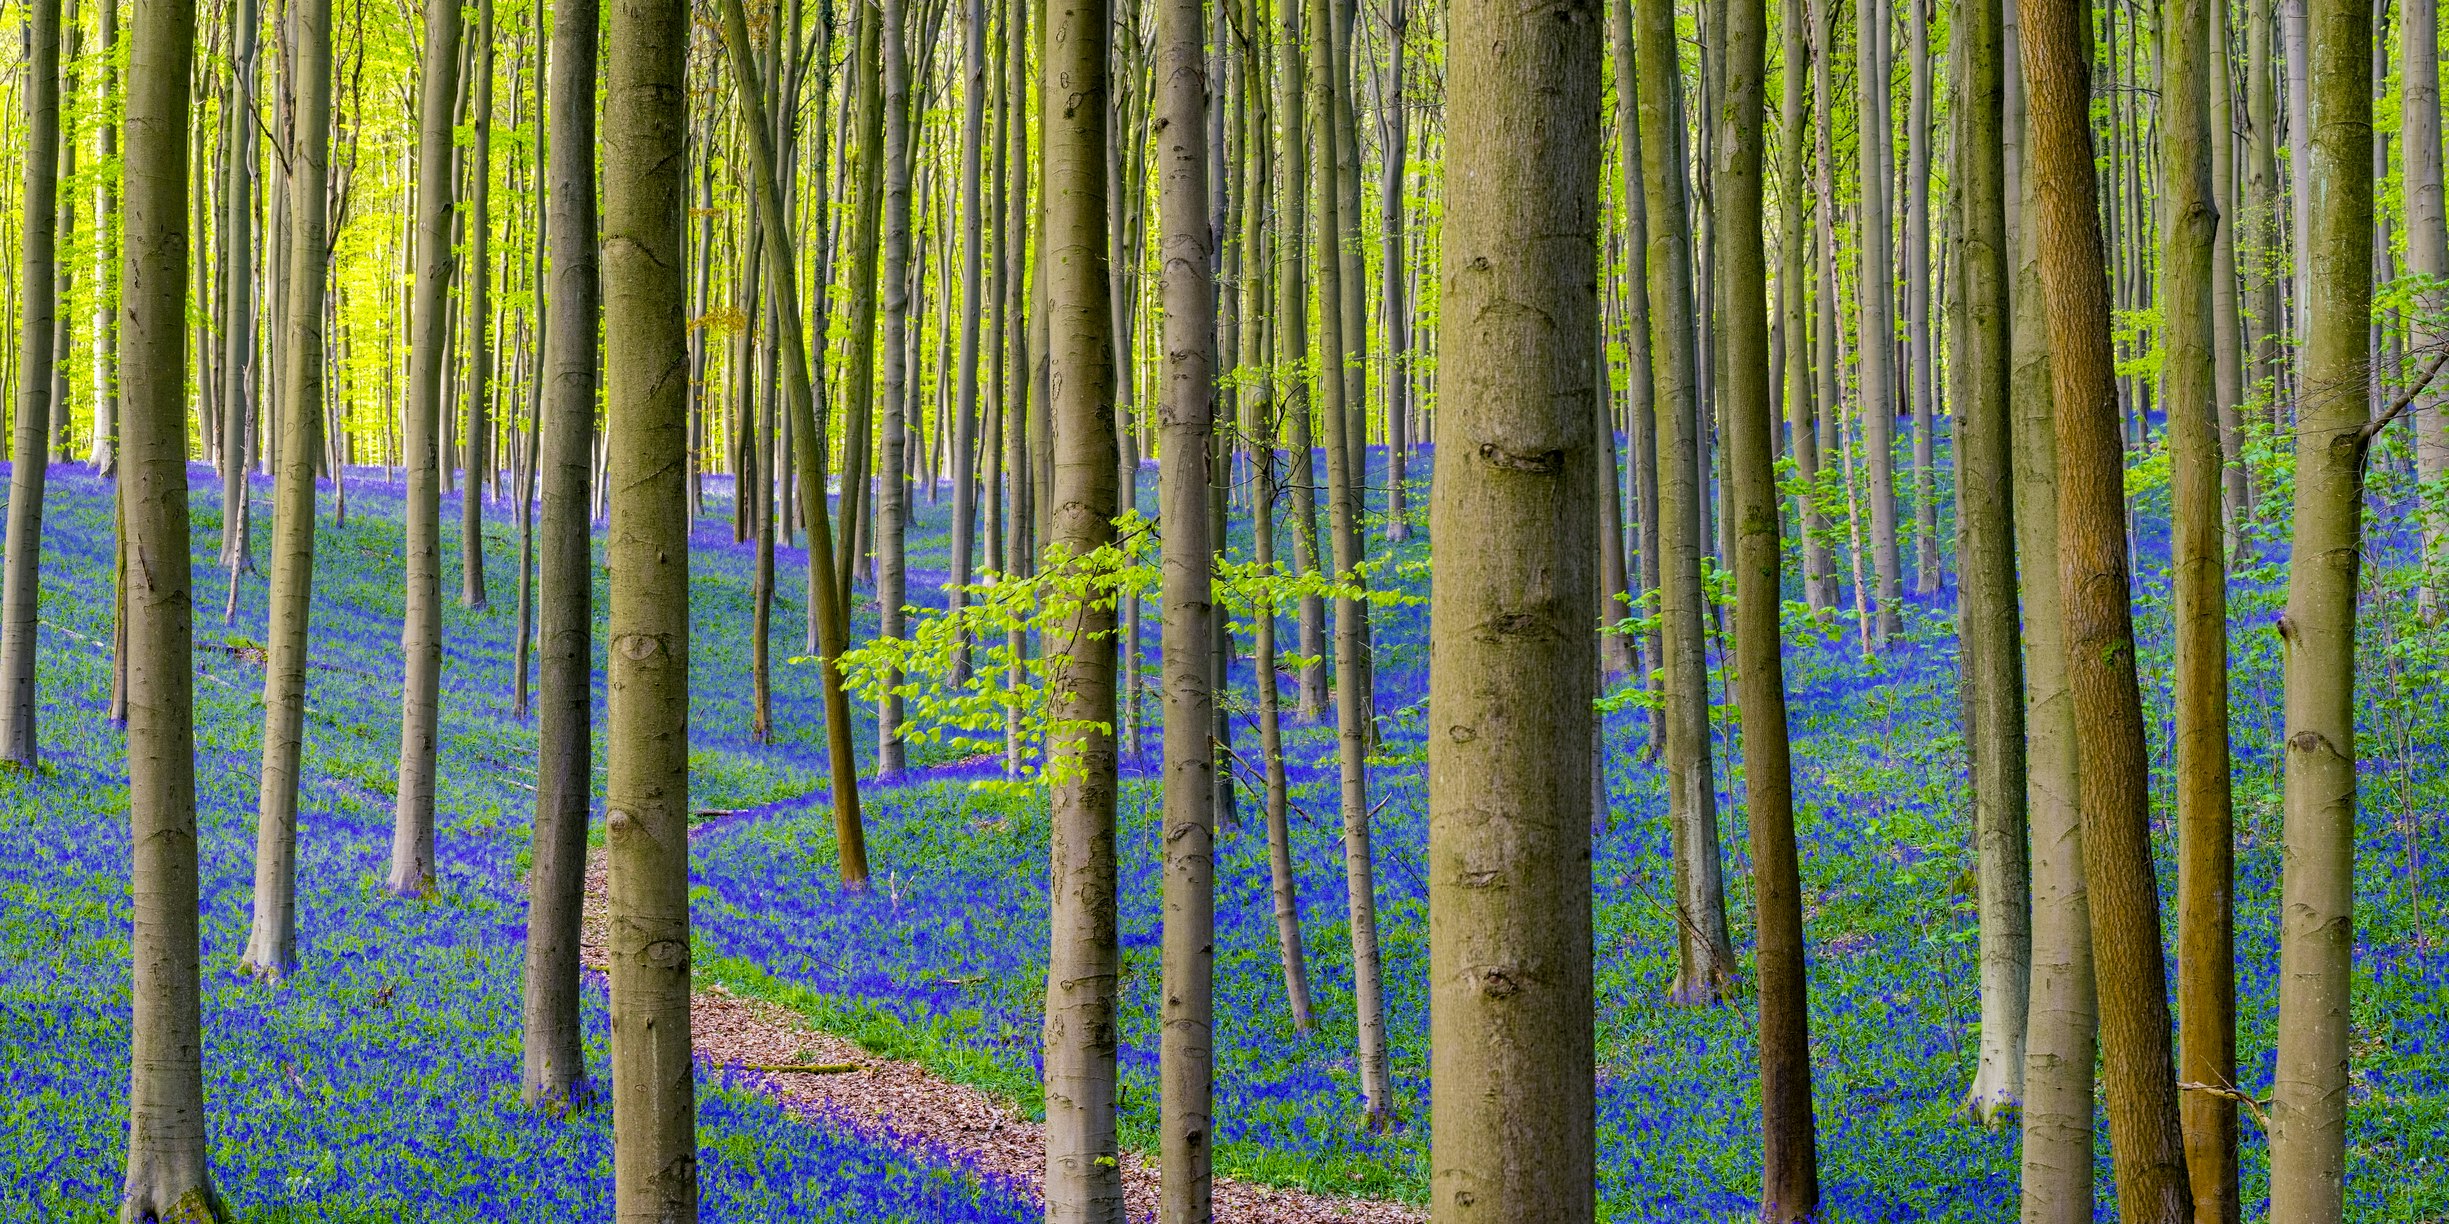 Travel News - Bluebell flowers in hardwood beech forest in Hallerbos